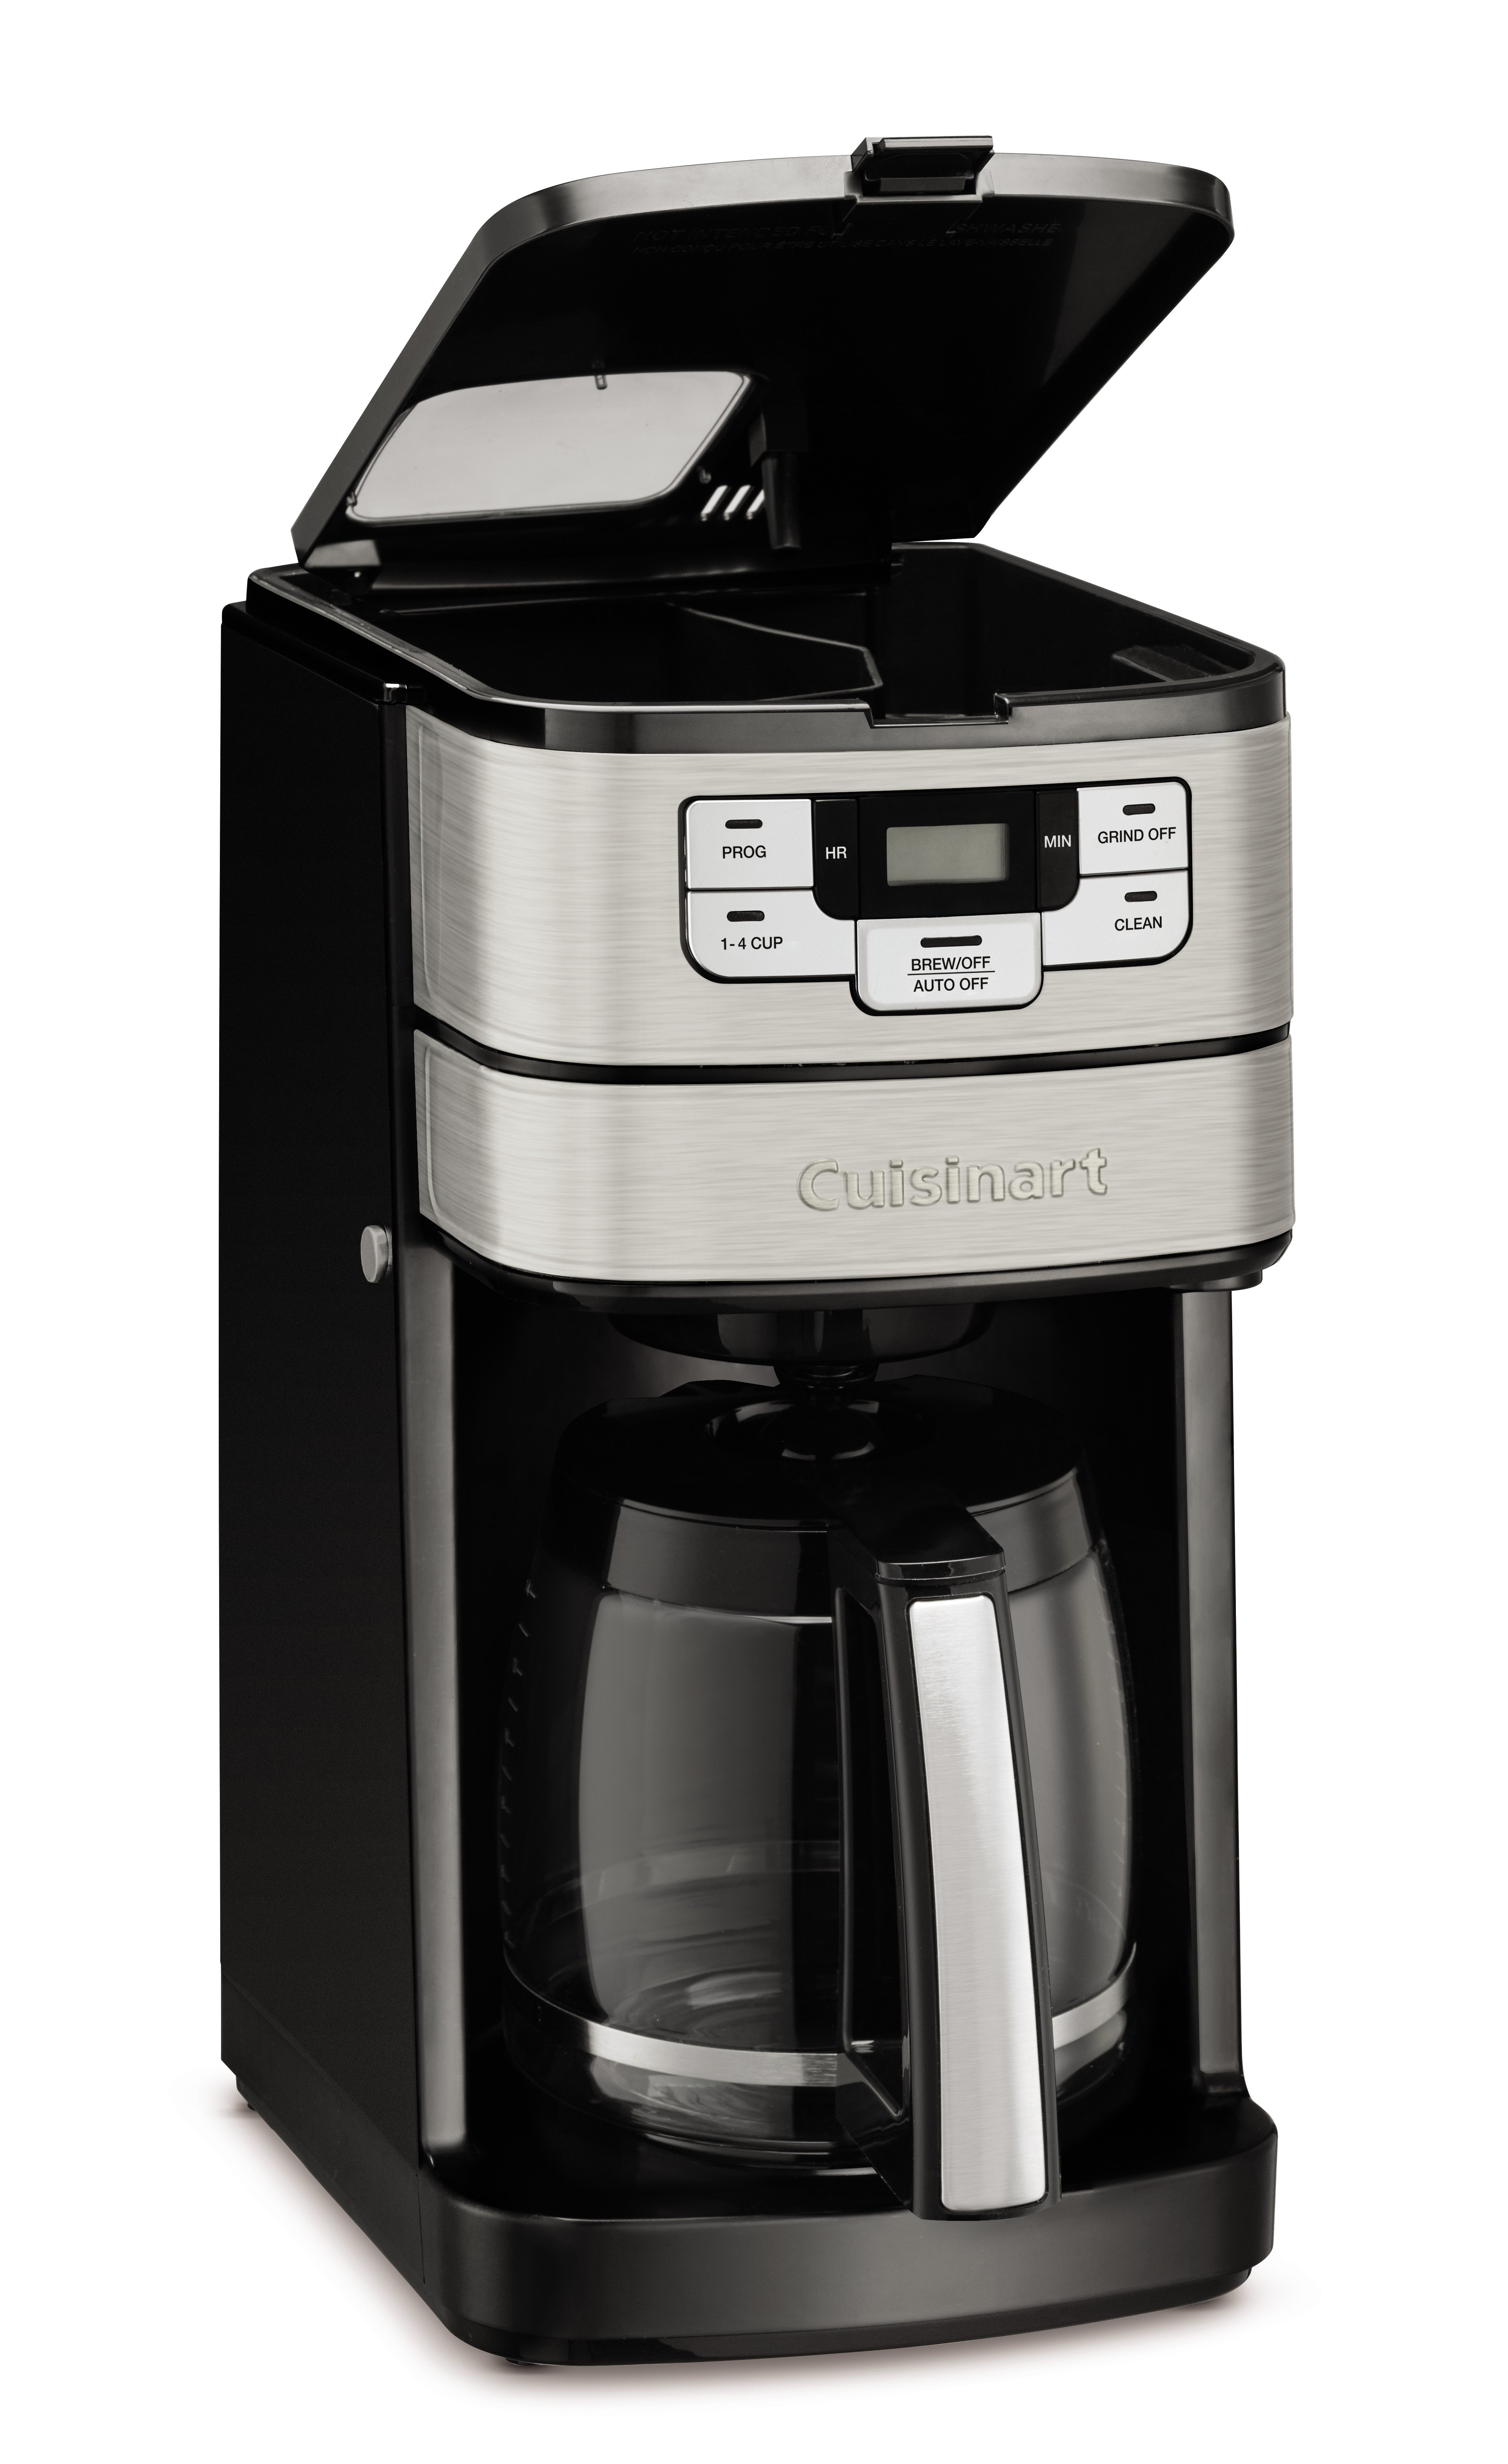 Cuisinart Grind & Brew Programmable Coffee Machine Coffee Maker Glass Carafe 